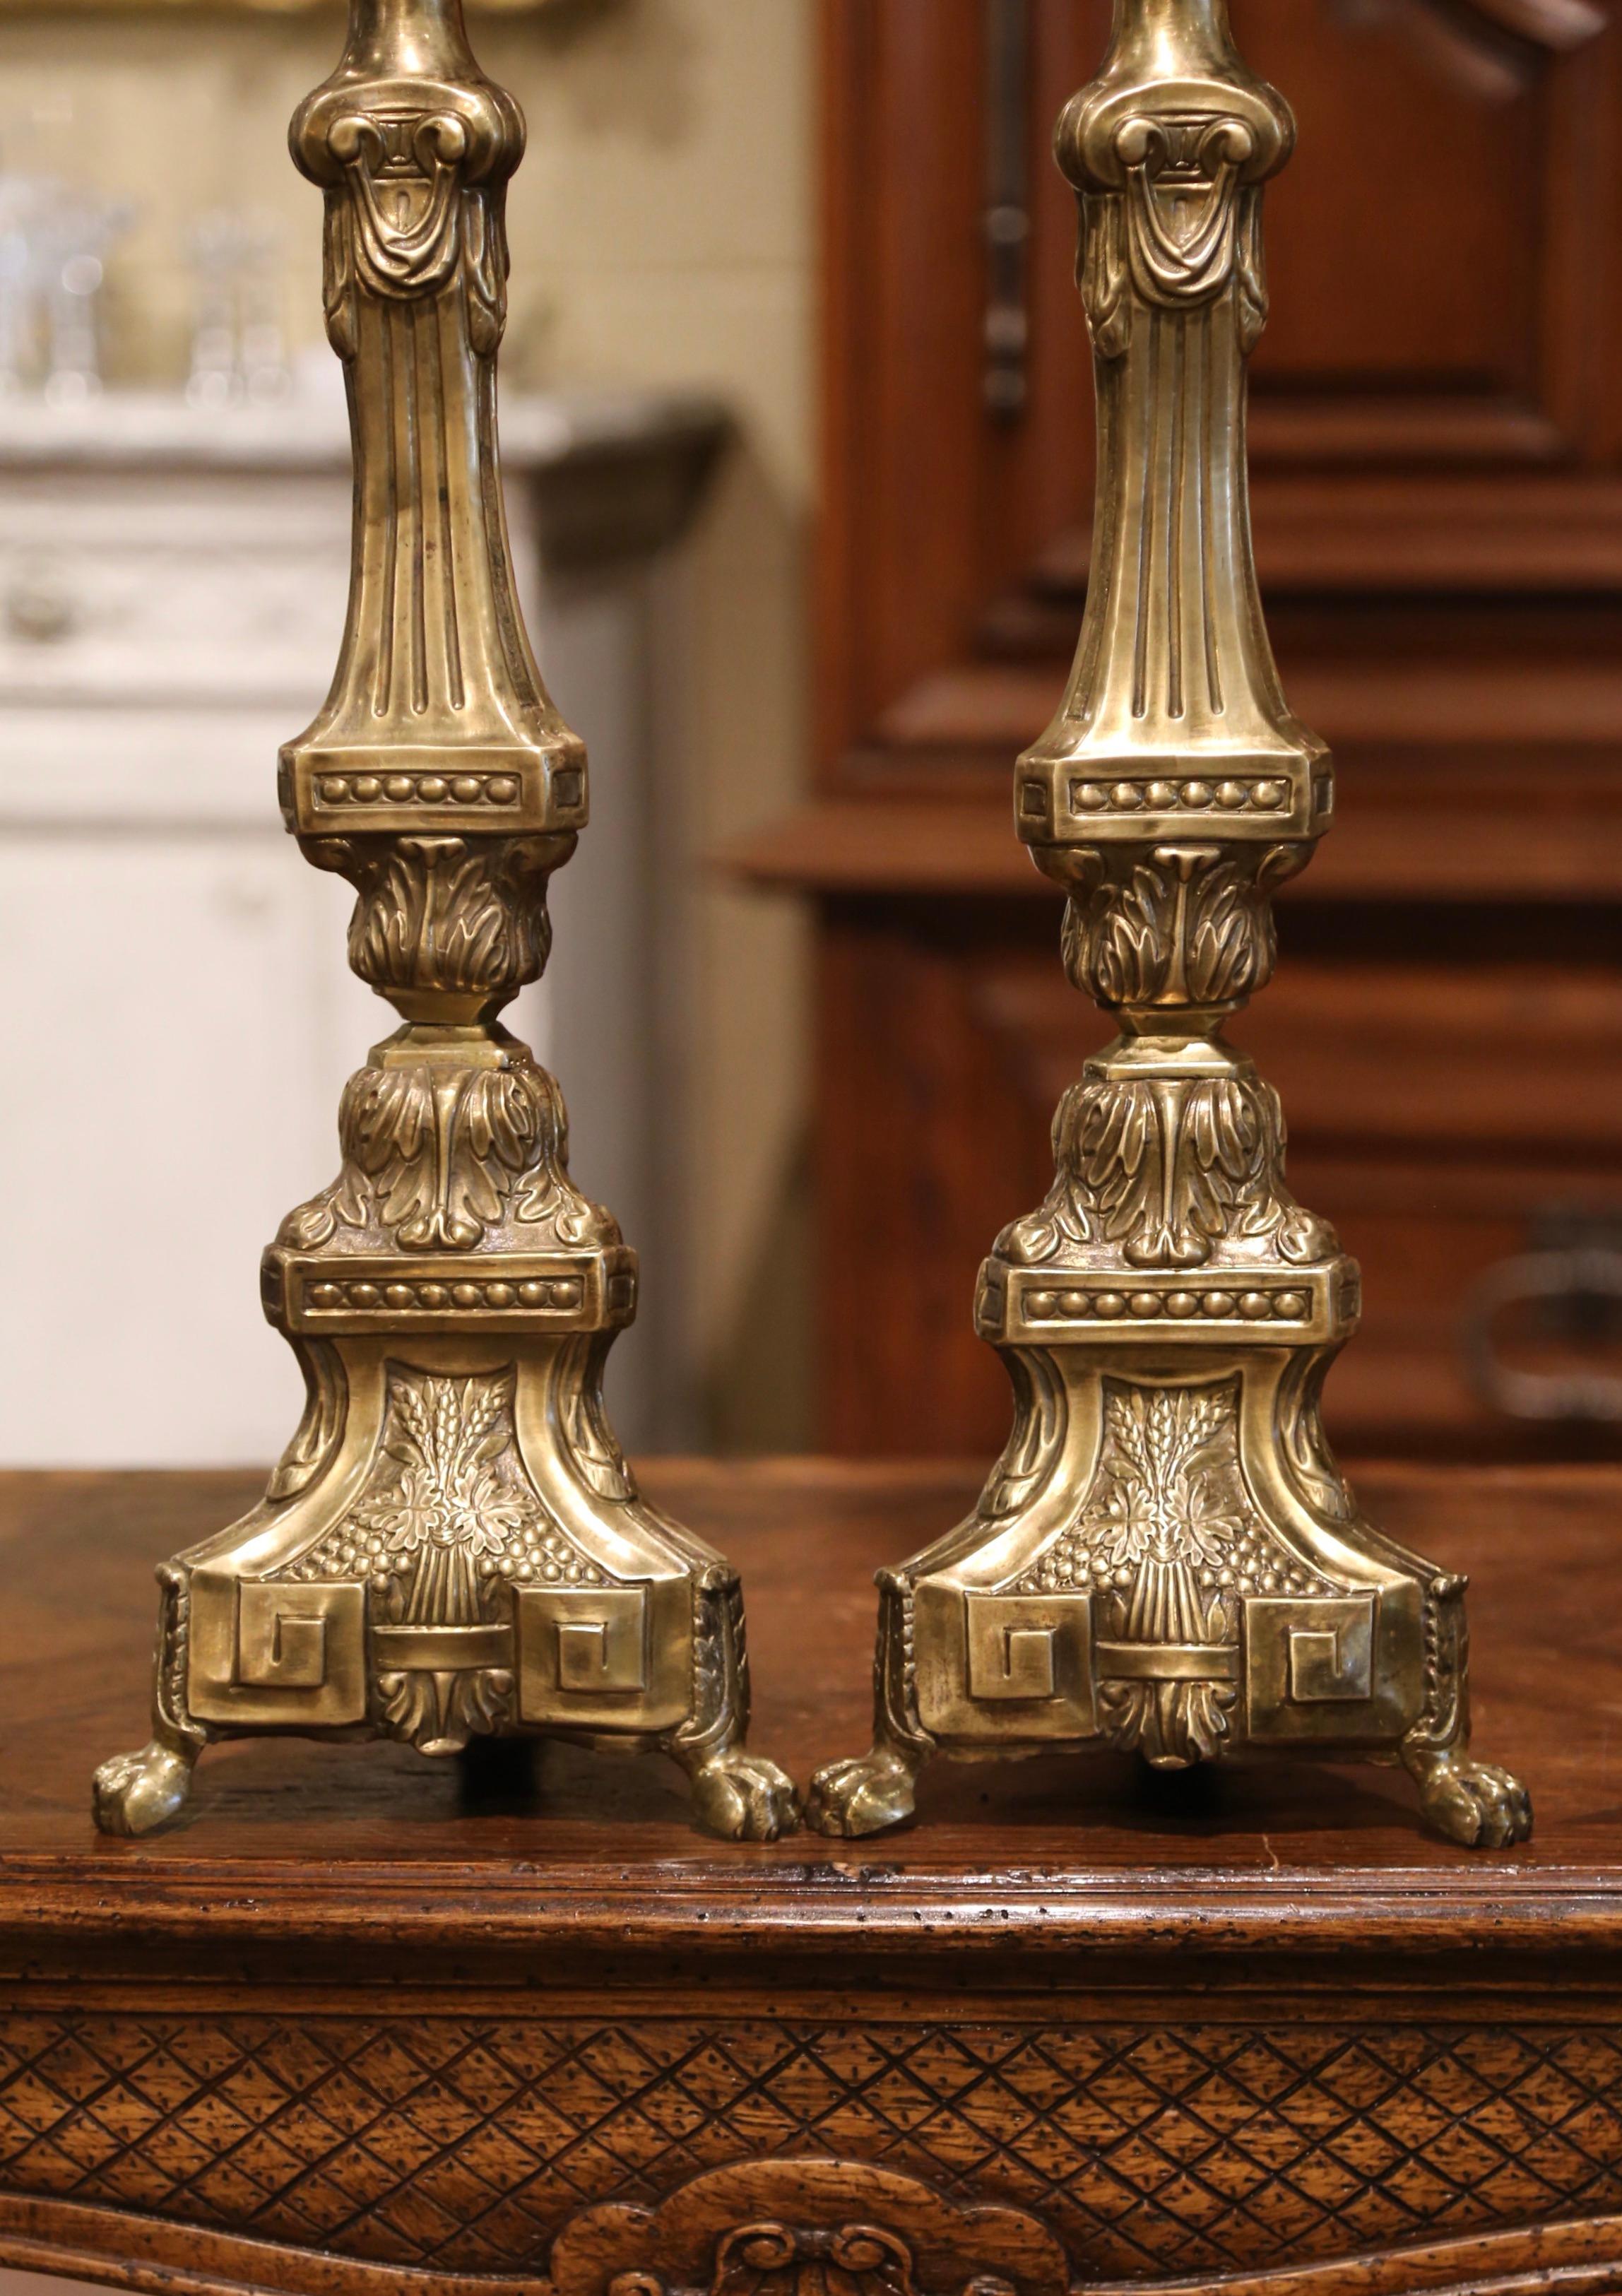 These brass candlesticks were found in a private chapel near Lyon, France. Crafted circa 1860, each candlestick sits on small paw feet with three sides decorated by repousse catholic motifs: the lamb, wheat for the bread and wine for the blood. The